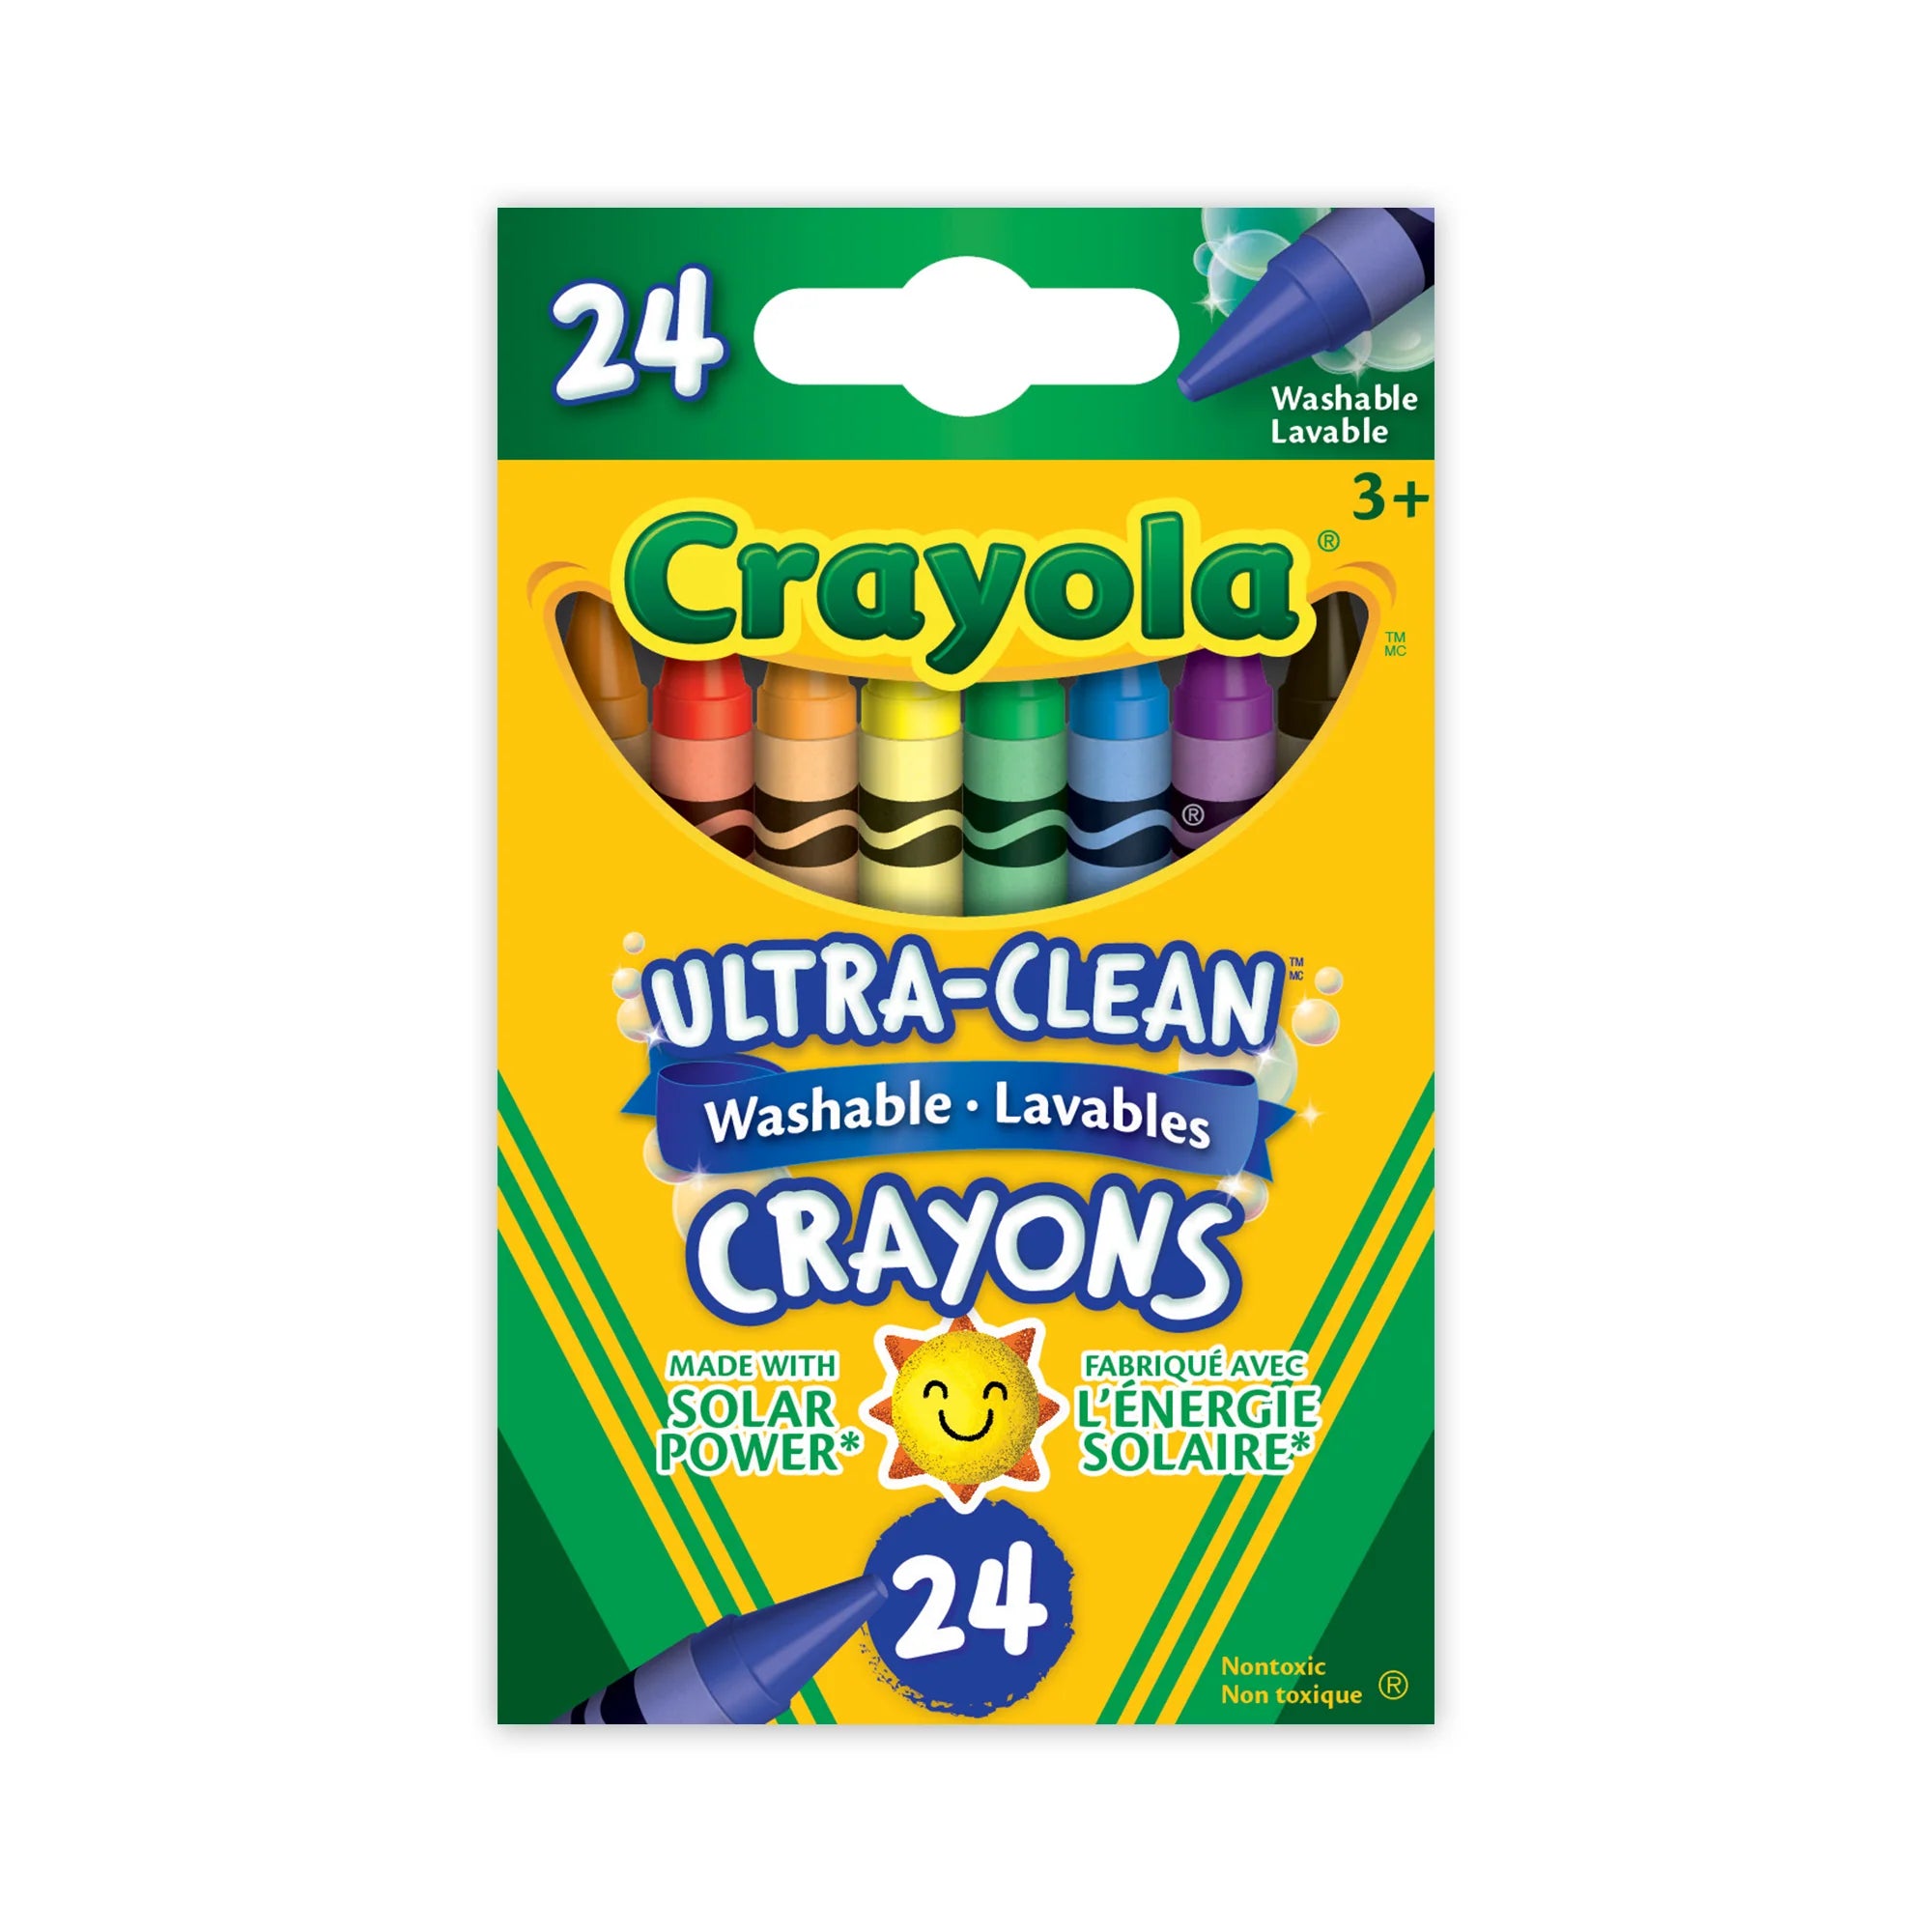 Crayons: Ultra-Clean Washable, 24 Count - Ages 3+